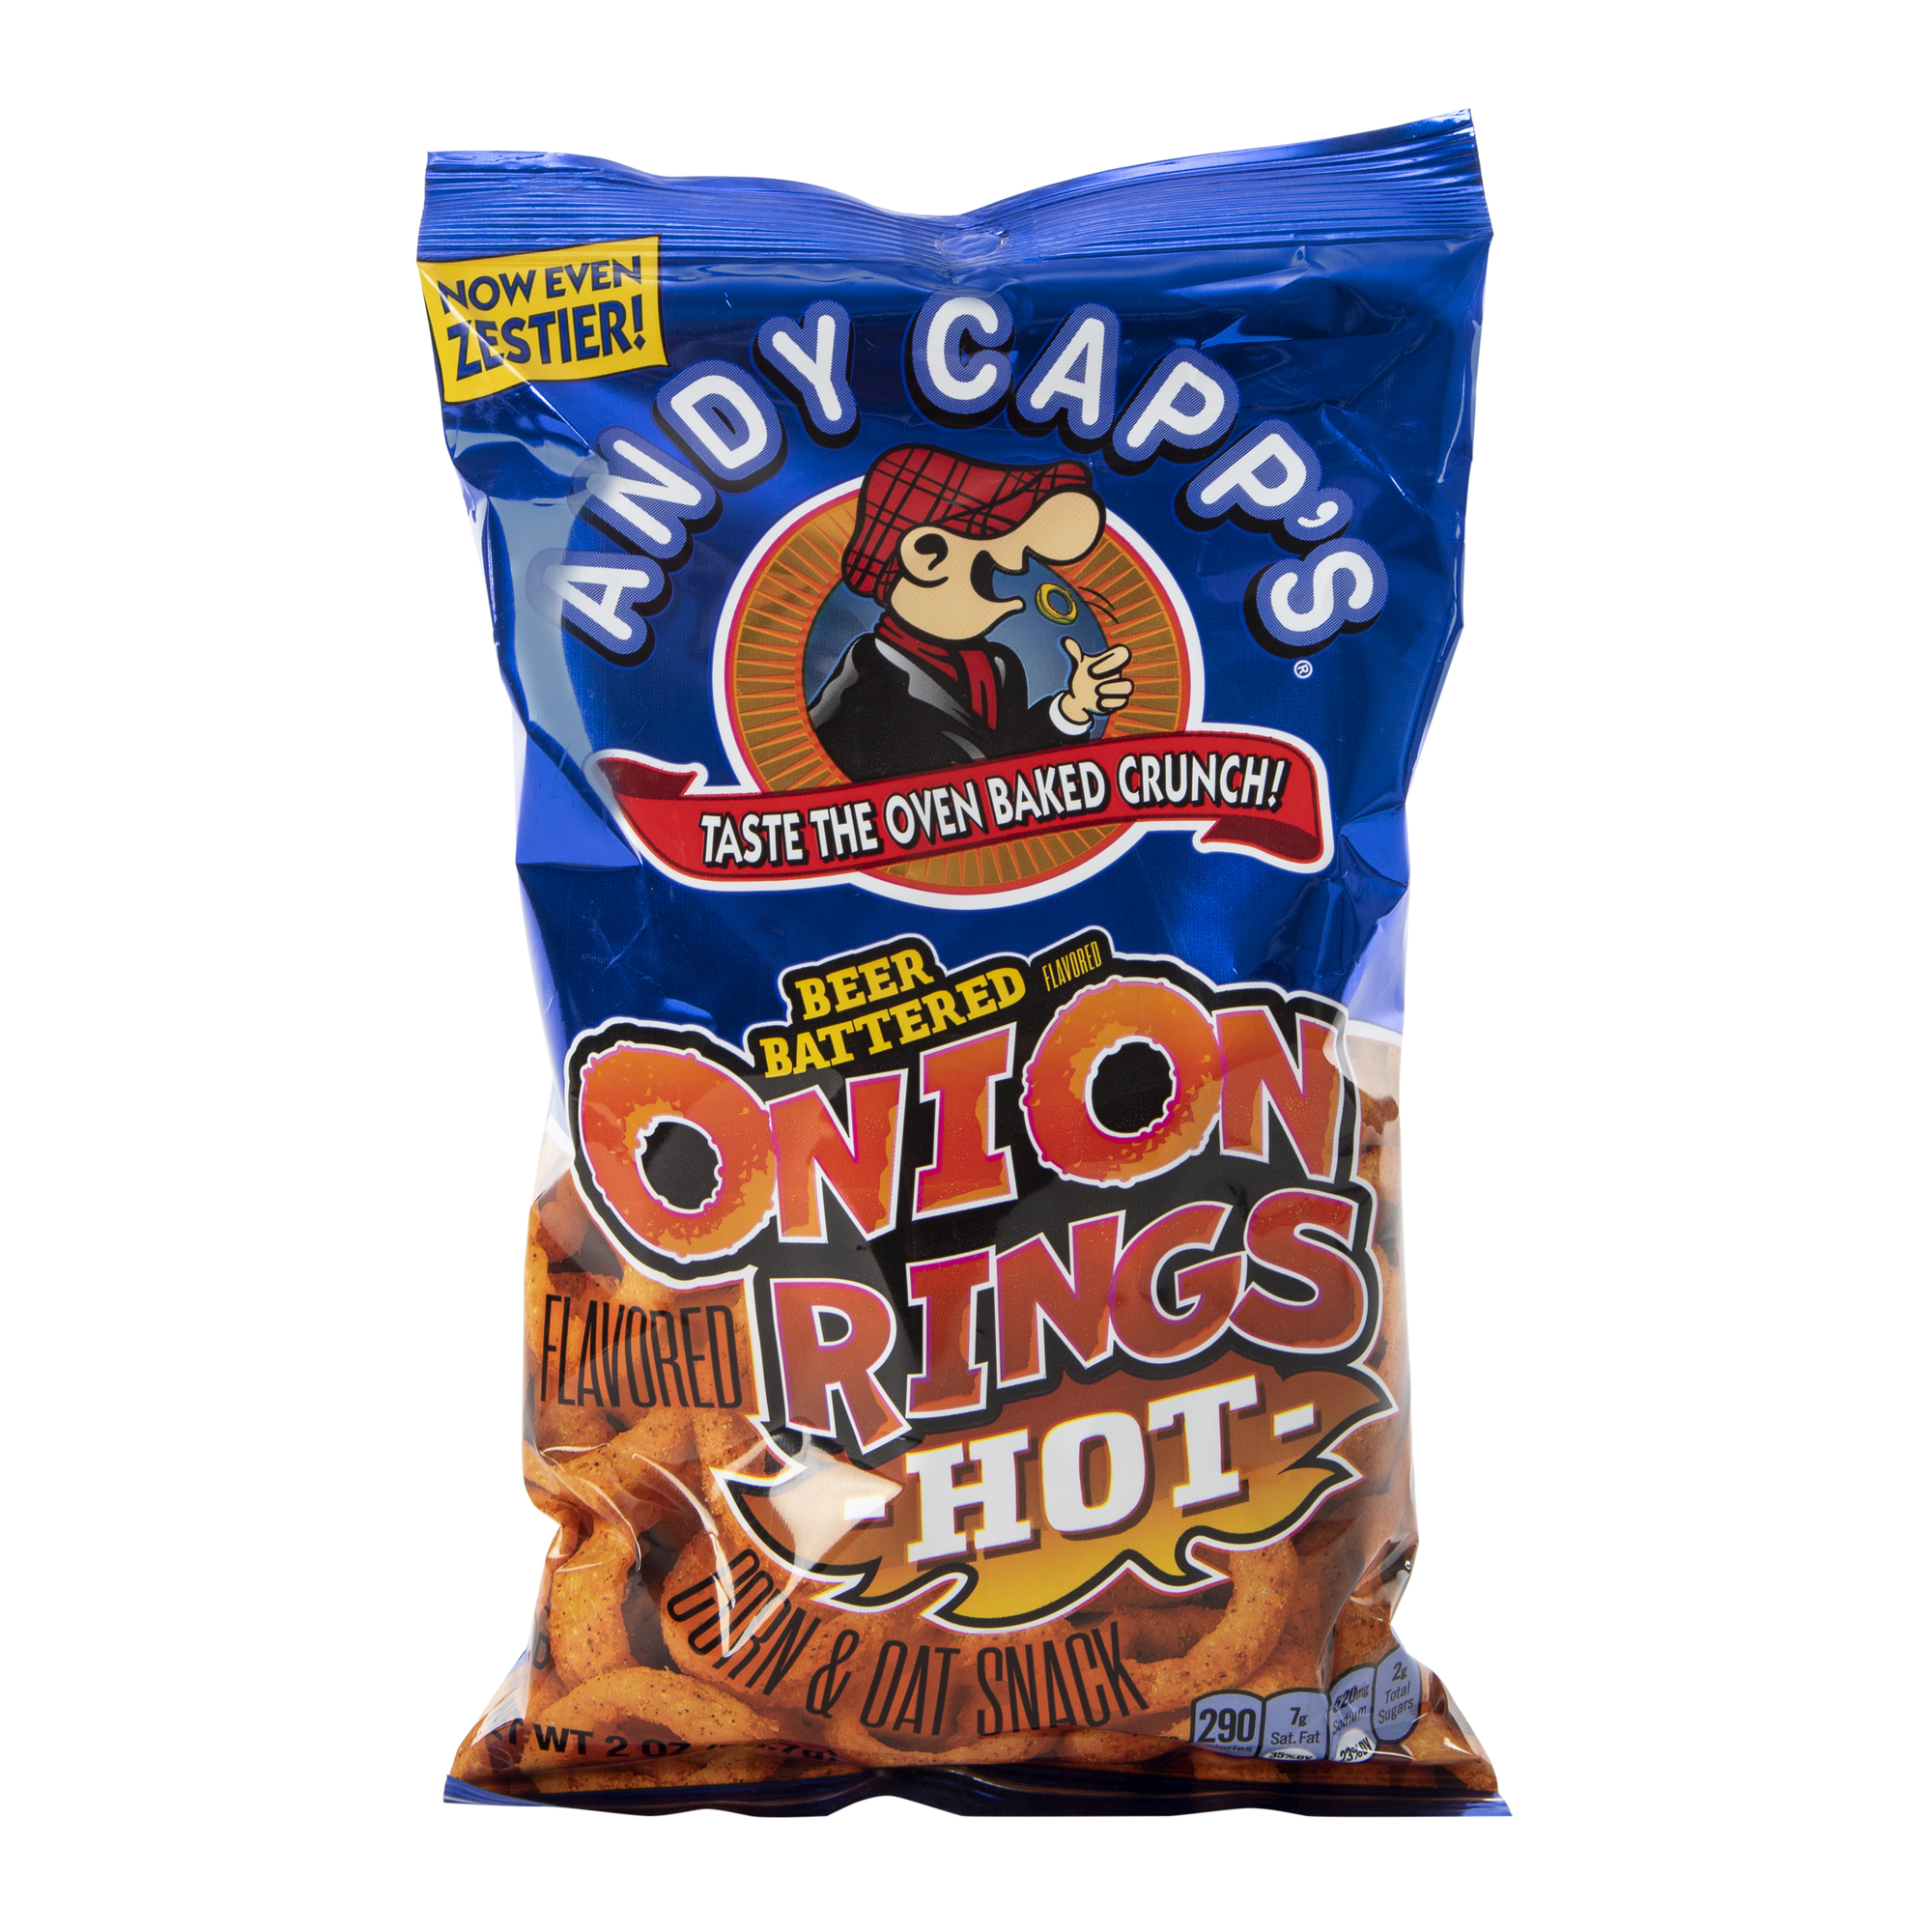 andy capp's® hot beer battered onion rings 2oz